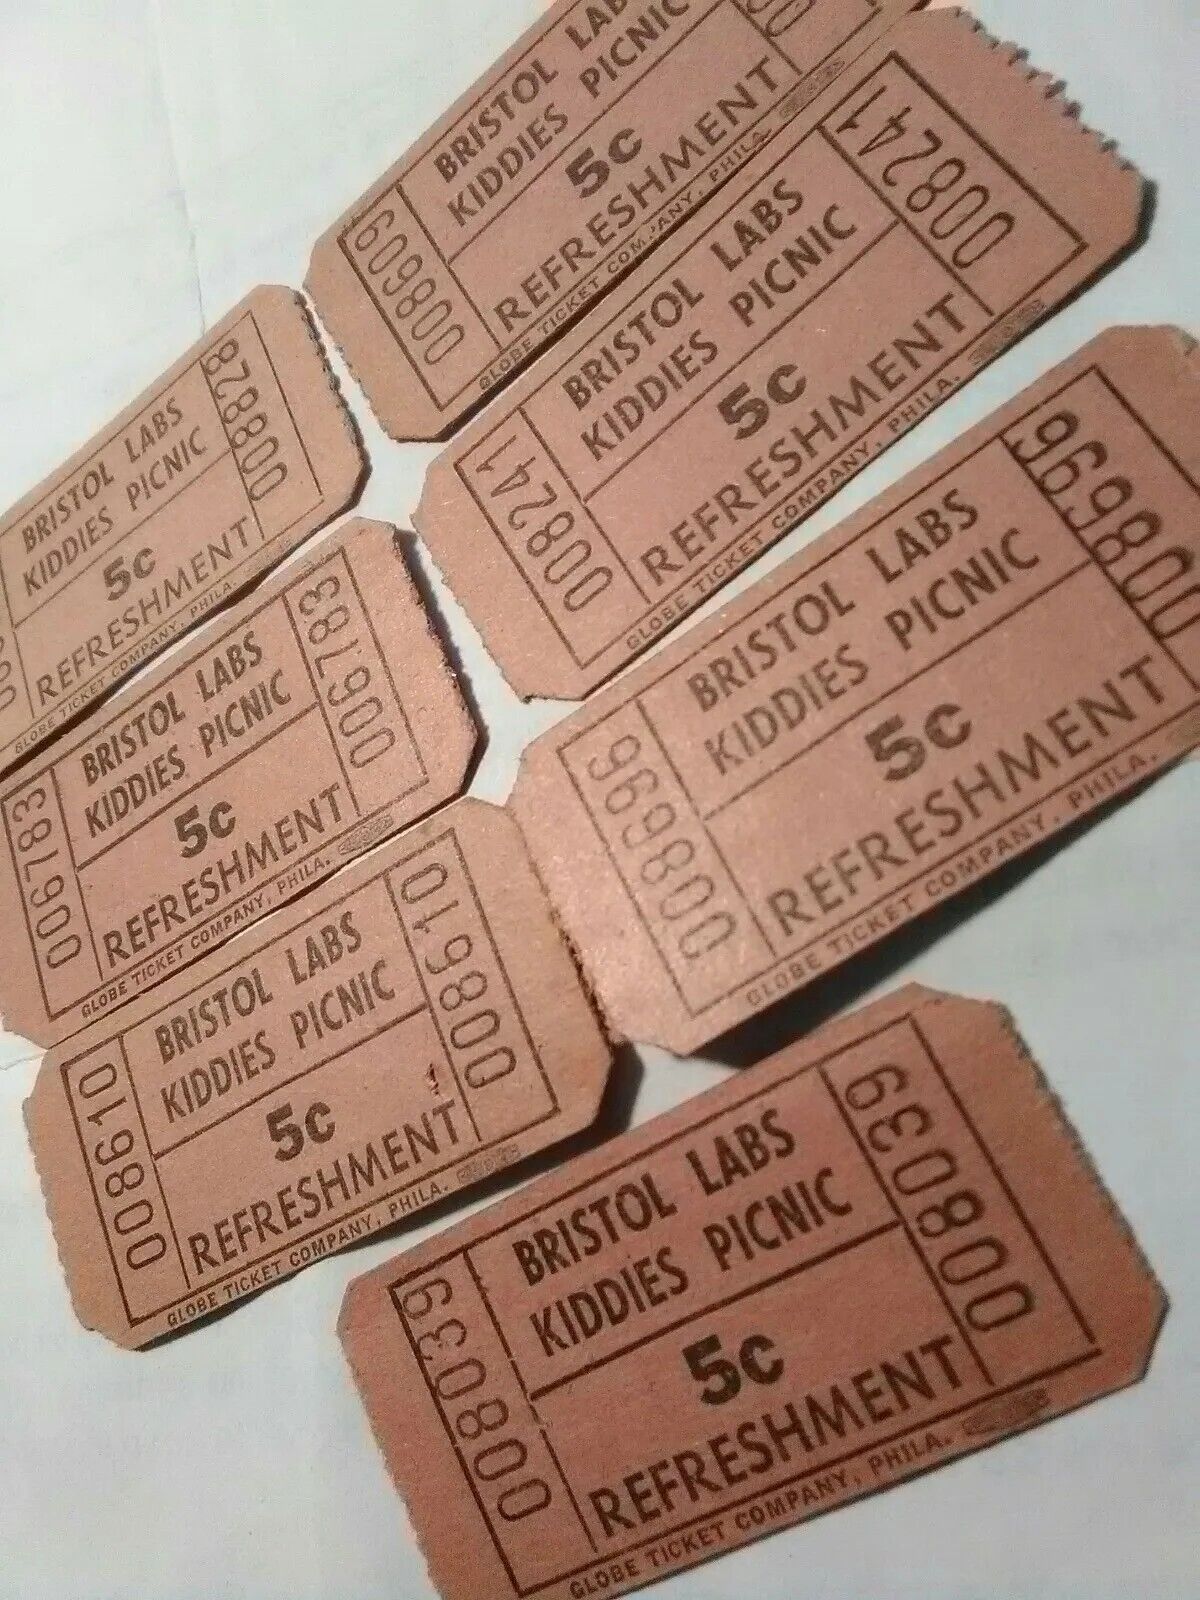 7 Lot Rare Early Vintage Orig Bristol Labs 5¢ Kiddies Picnic Refreshment Tickets